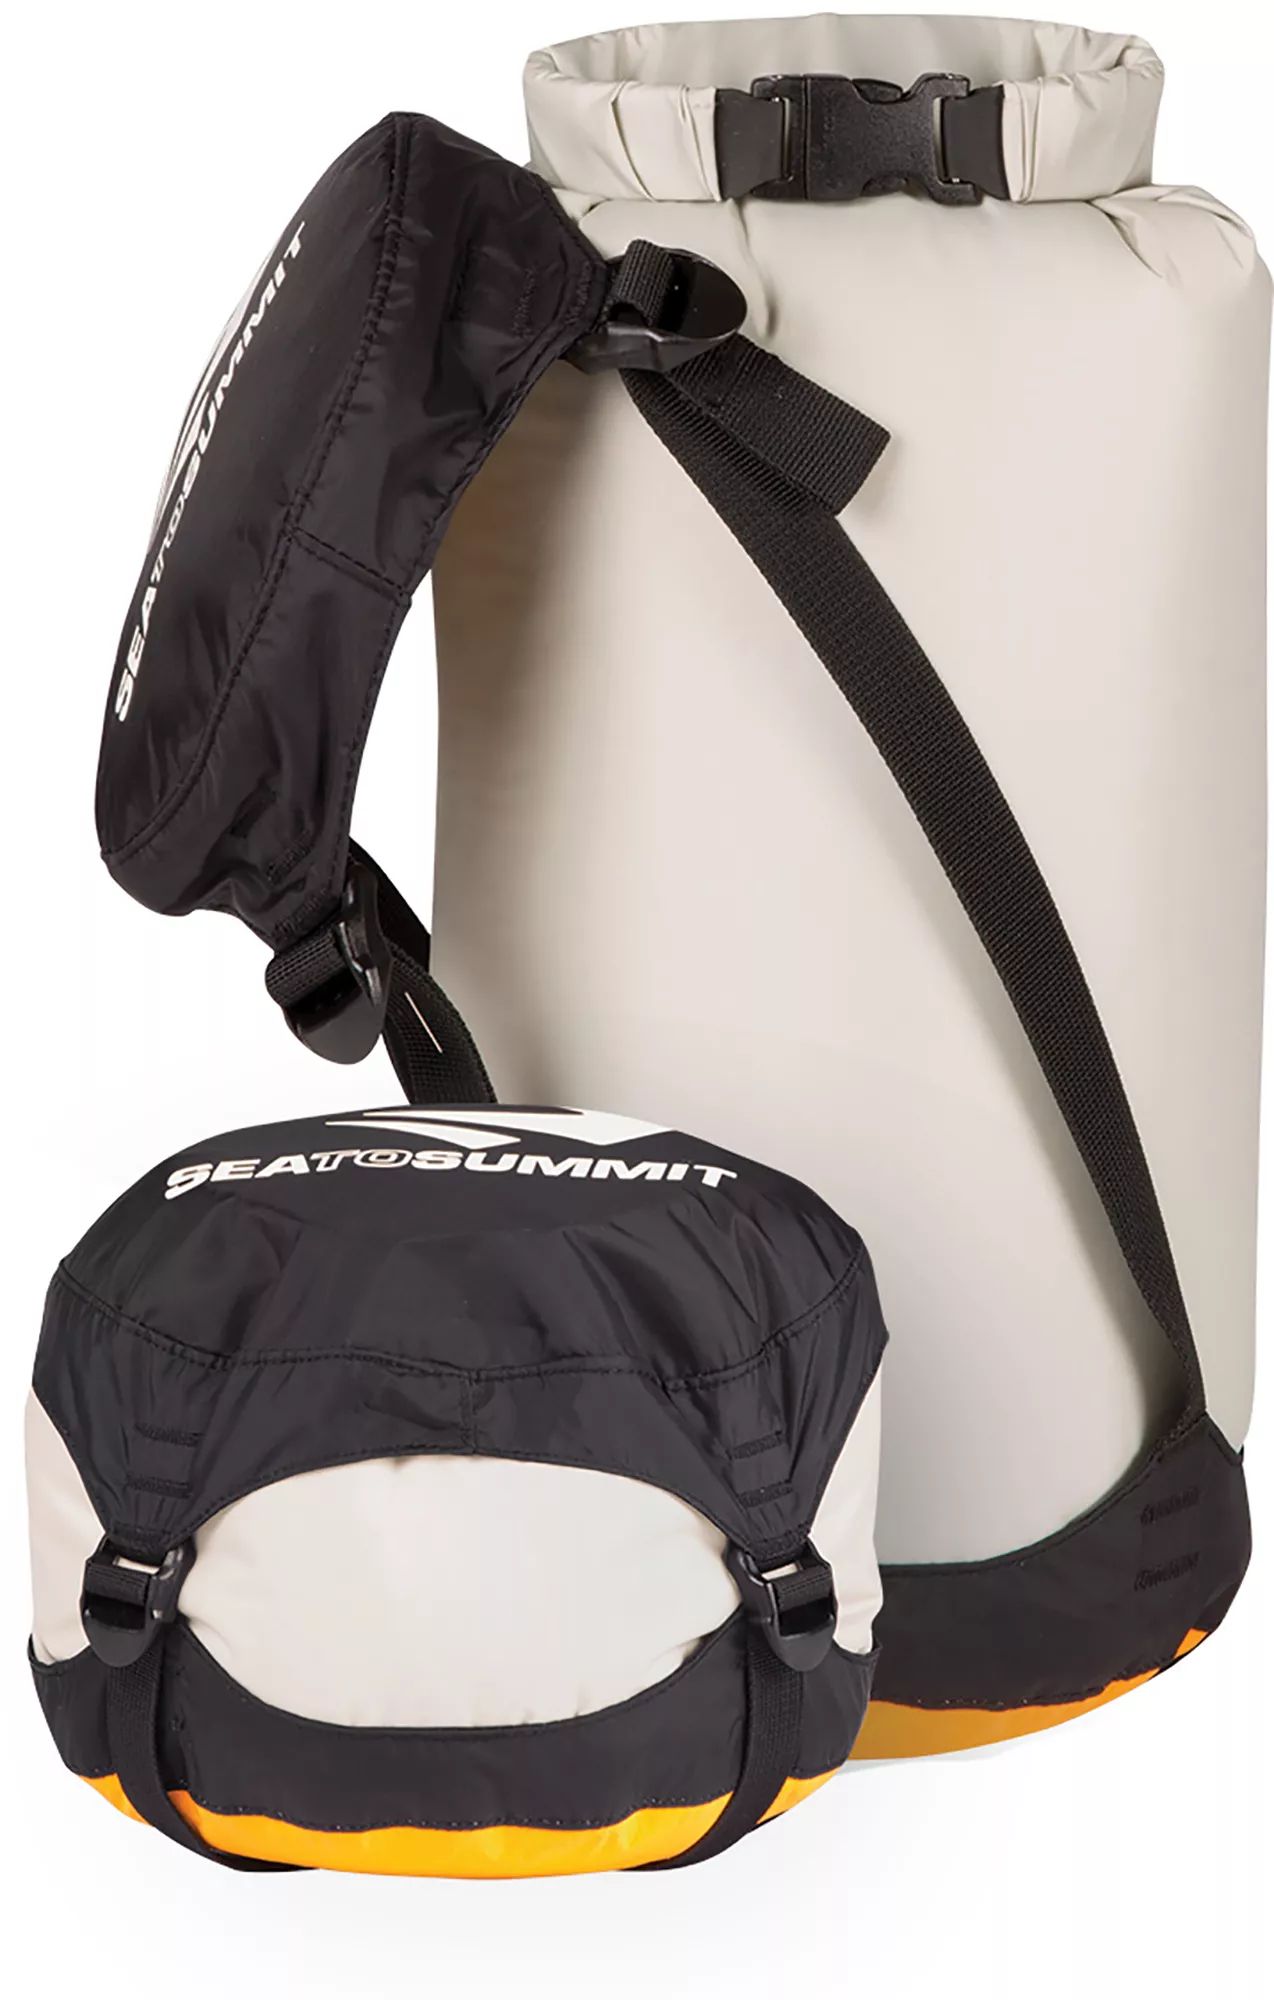 Sea to Summit eVent Dry Sack, 14L | Public Lands